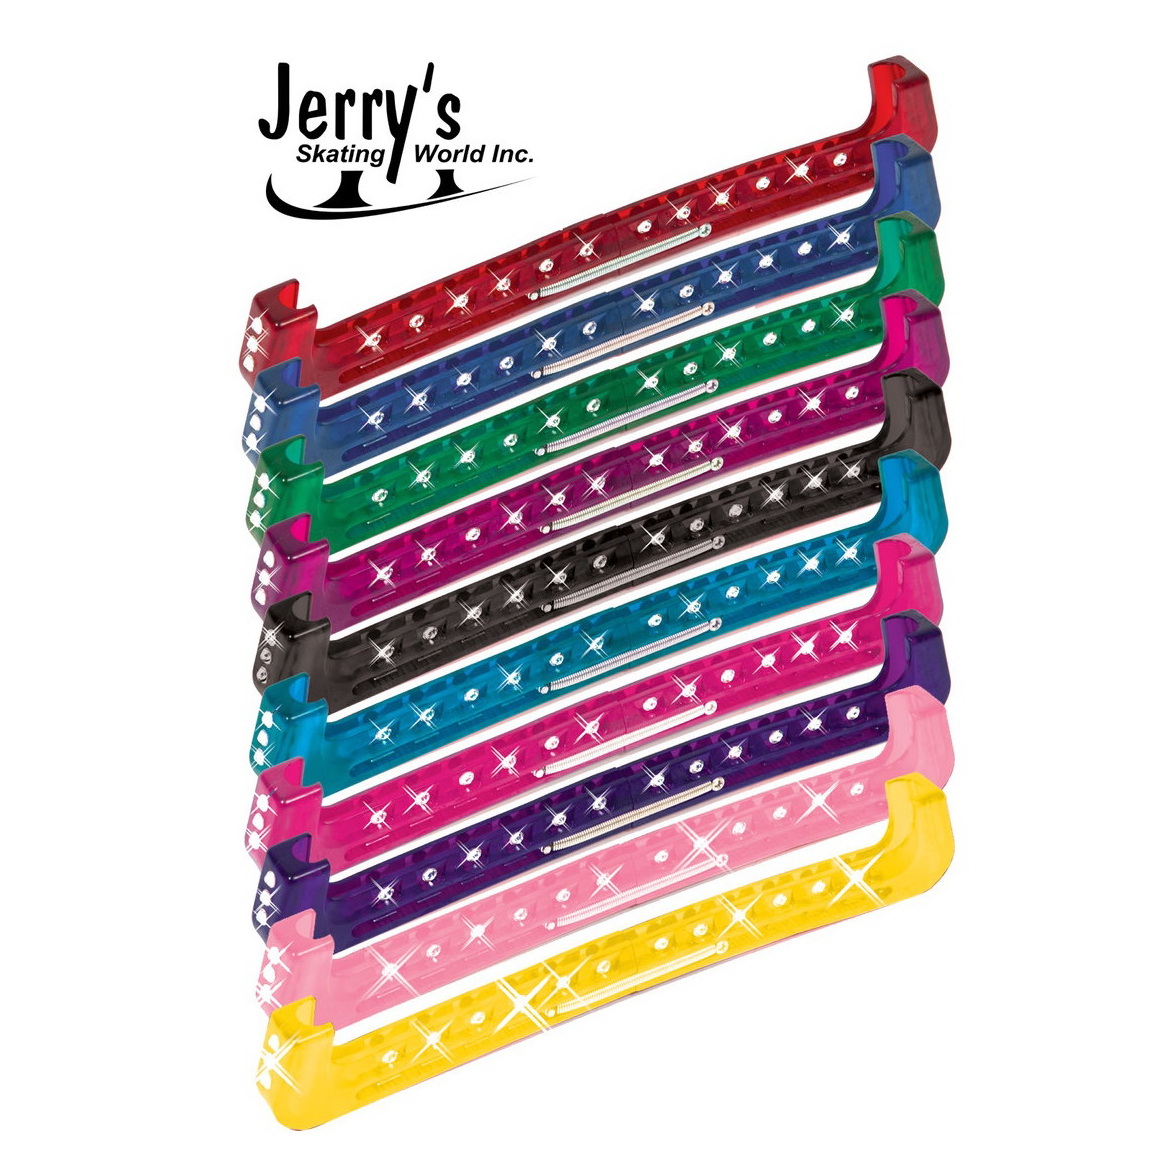 Jerry's blade guards with swarovski crystals - Golden Skate